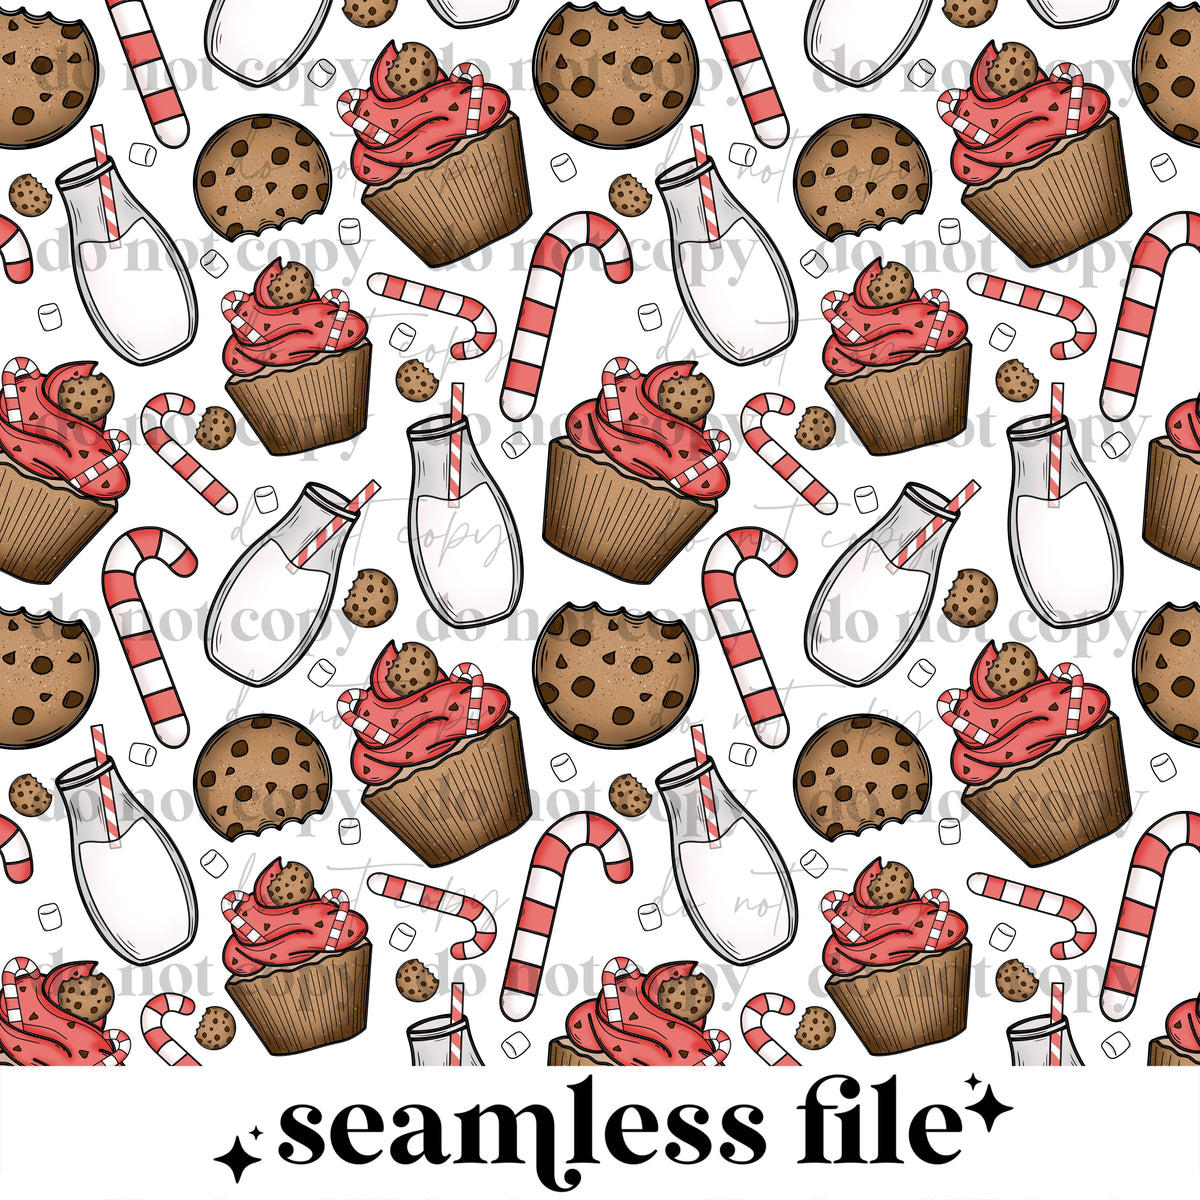 Milk and cookies Seamless